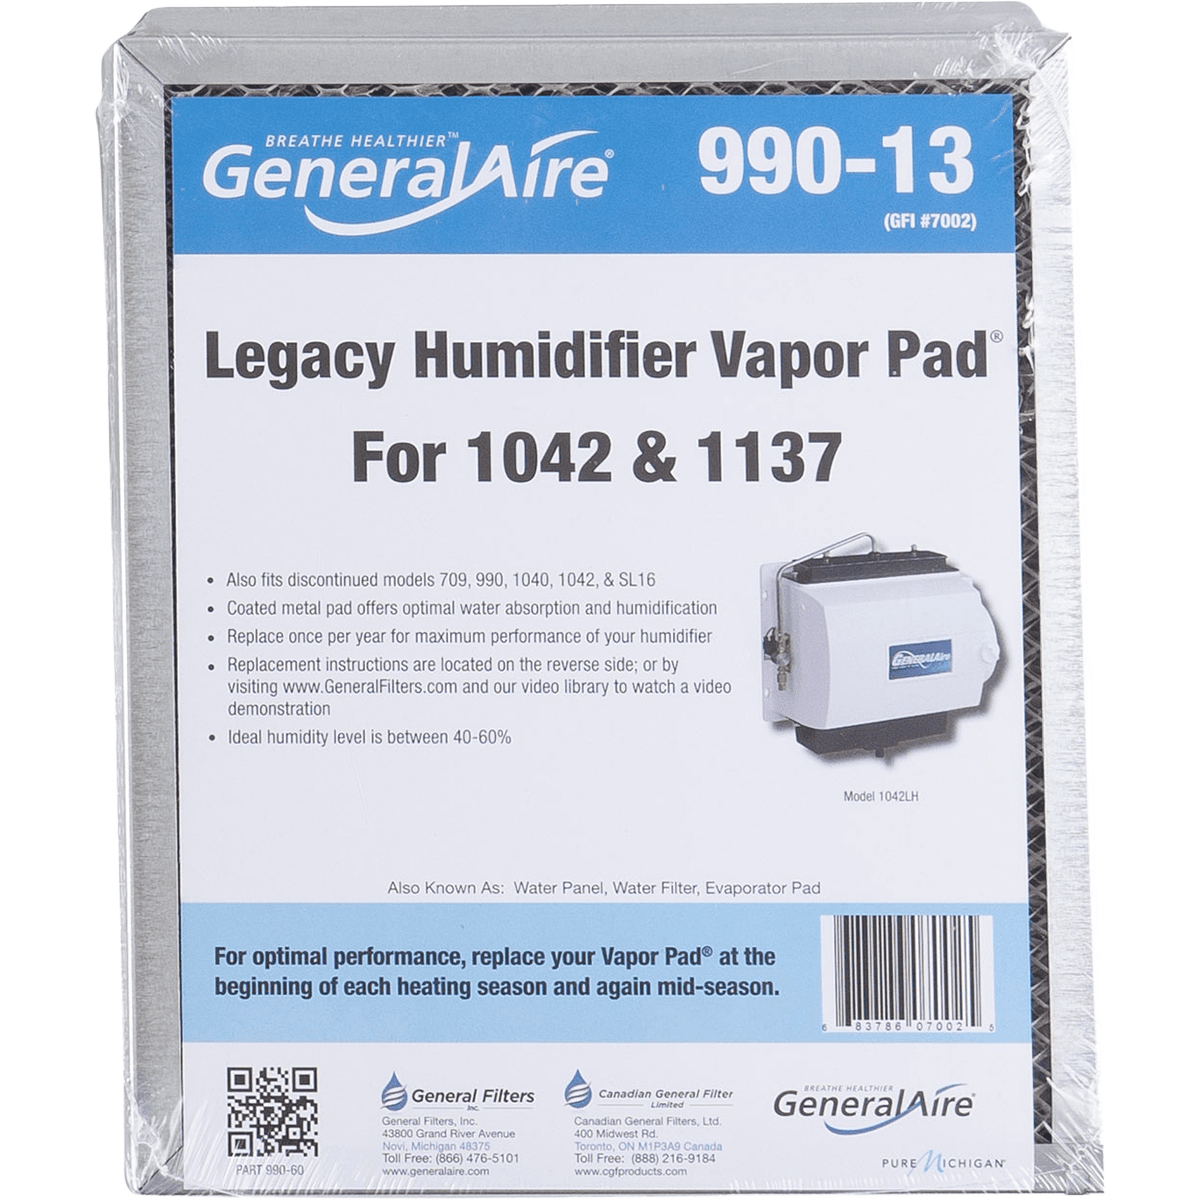 General Aire GA990-13 Vapor Pad (for 1042 and 1137)